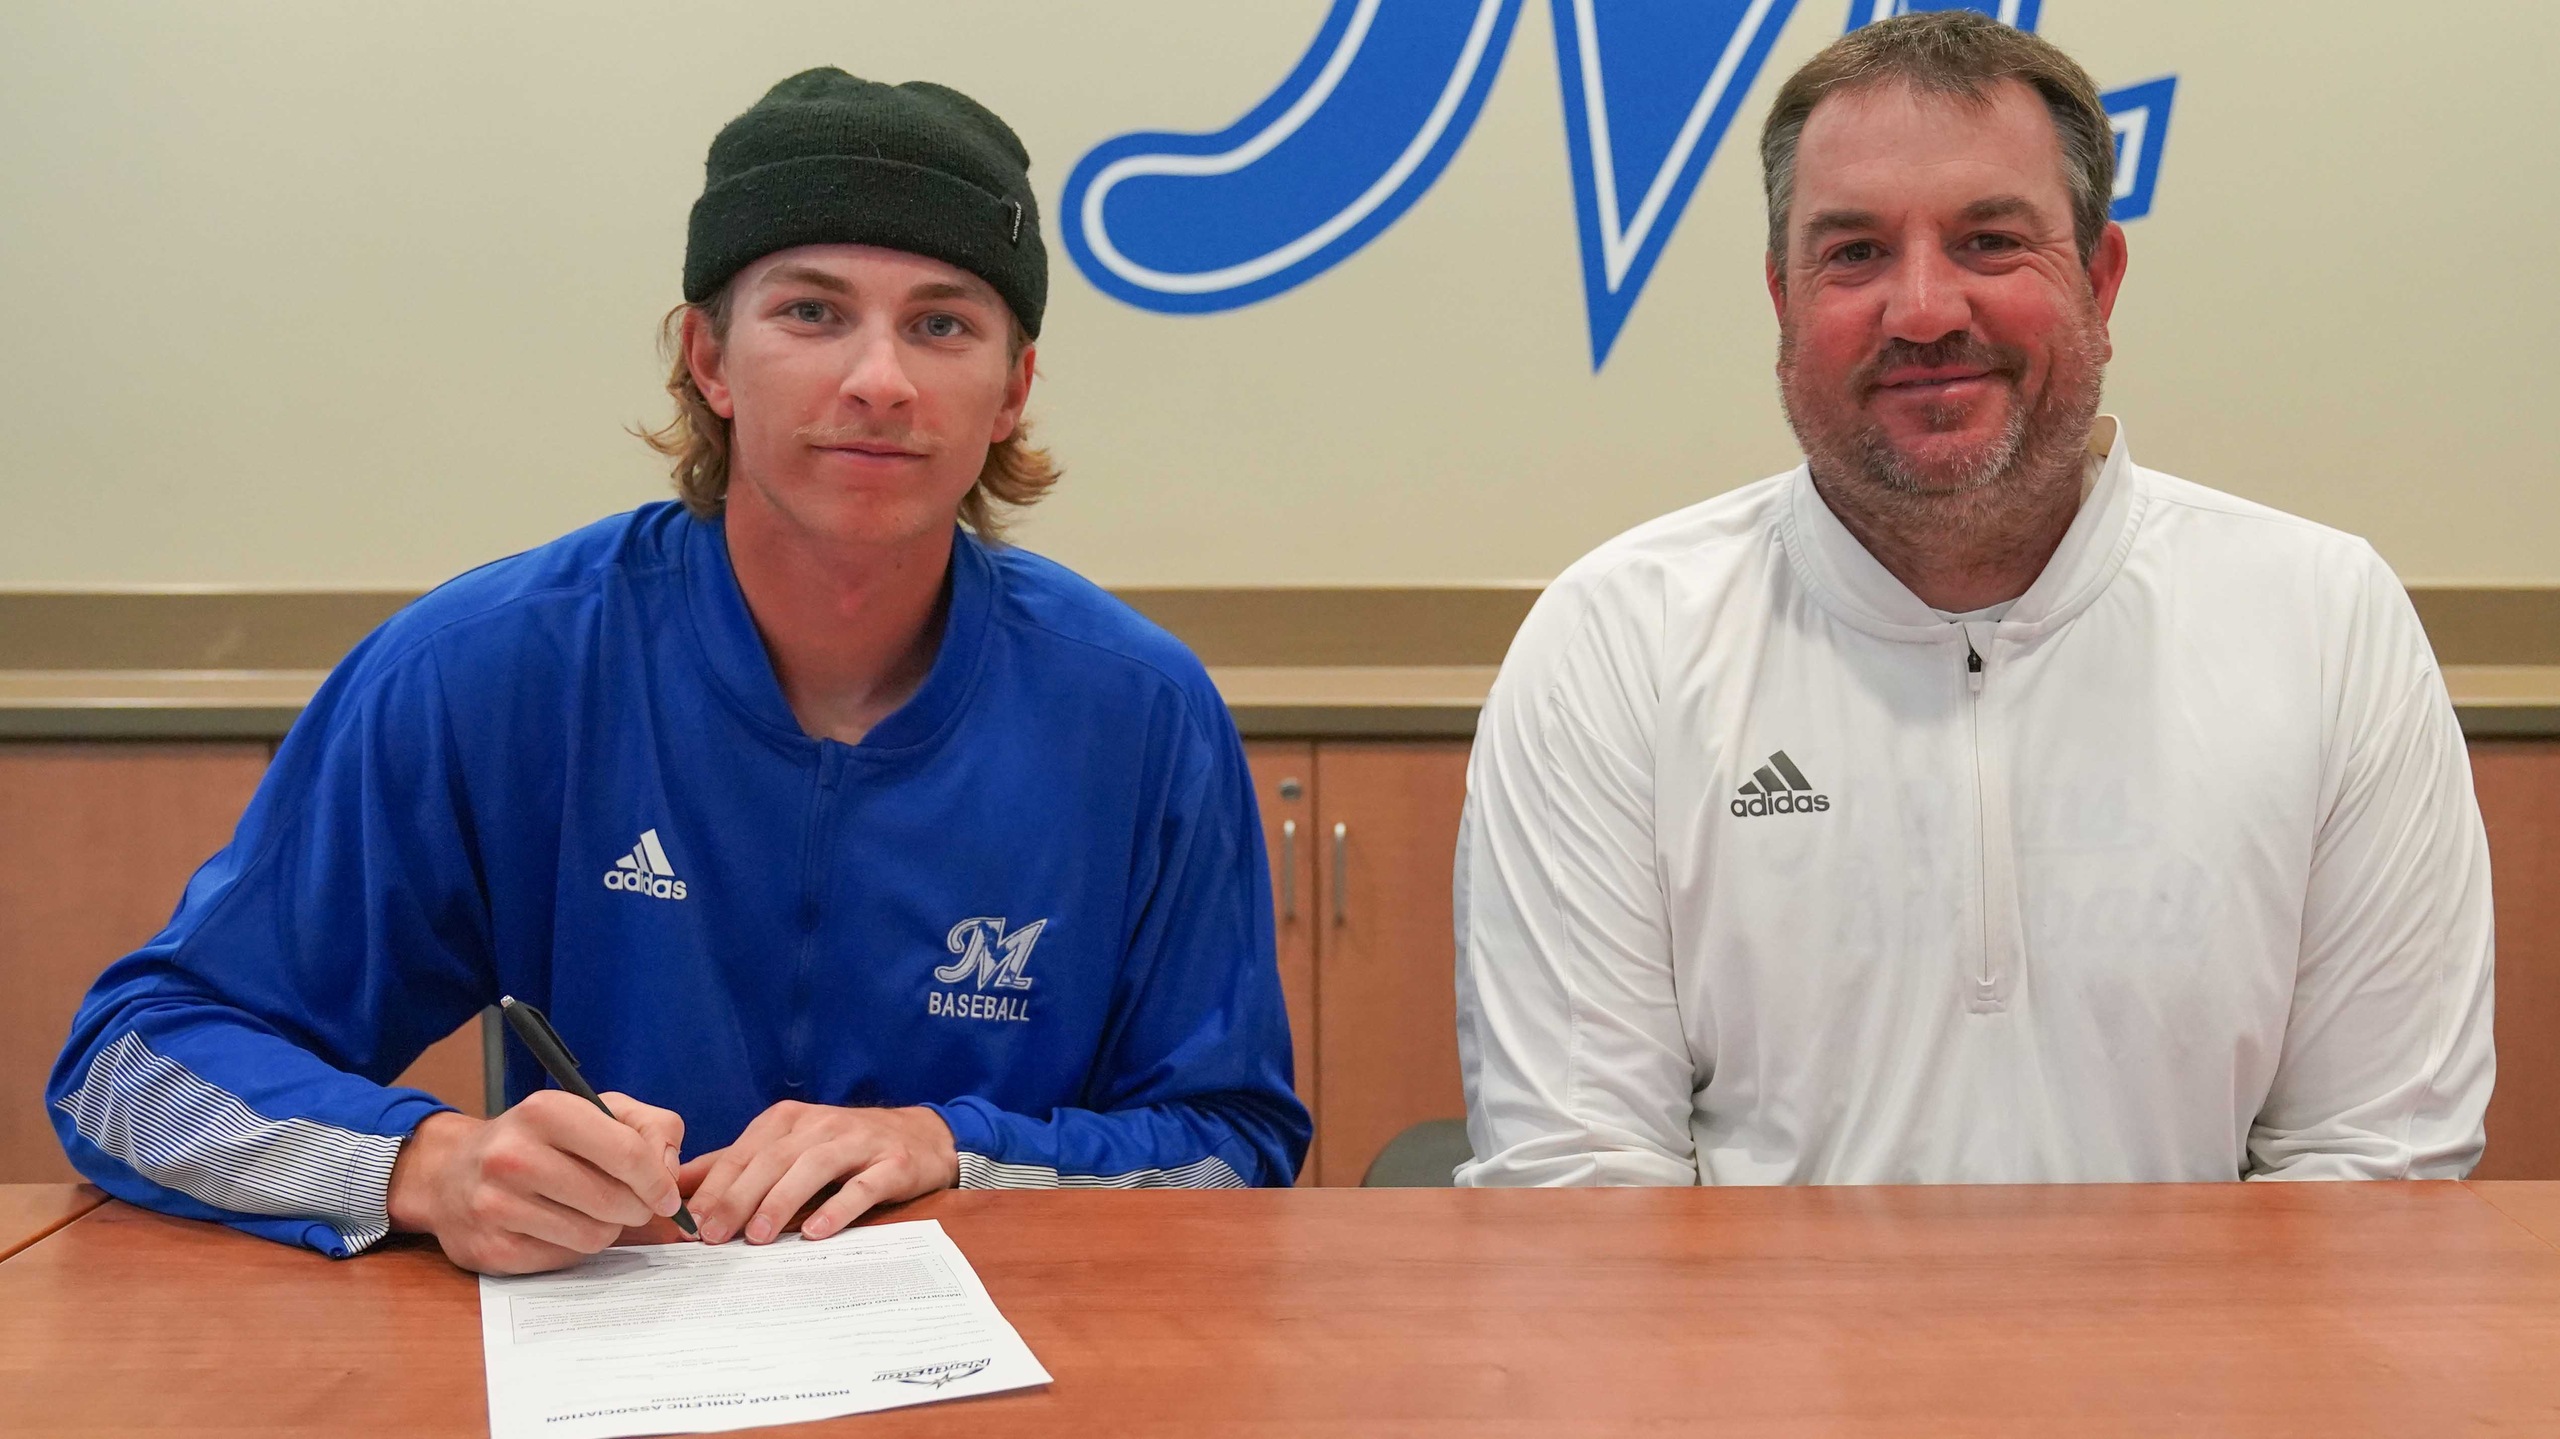 Daegen Morcom to continue baseball career at Valley City State in N.D.